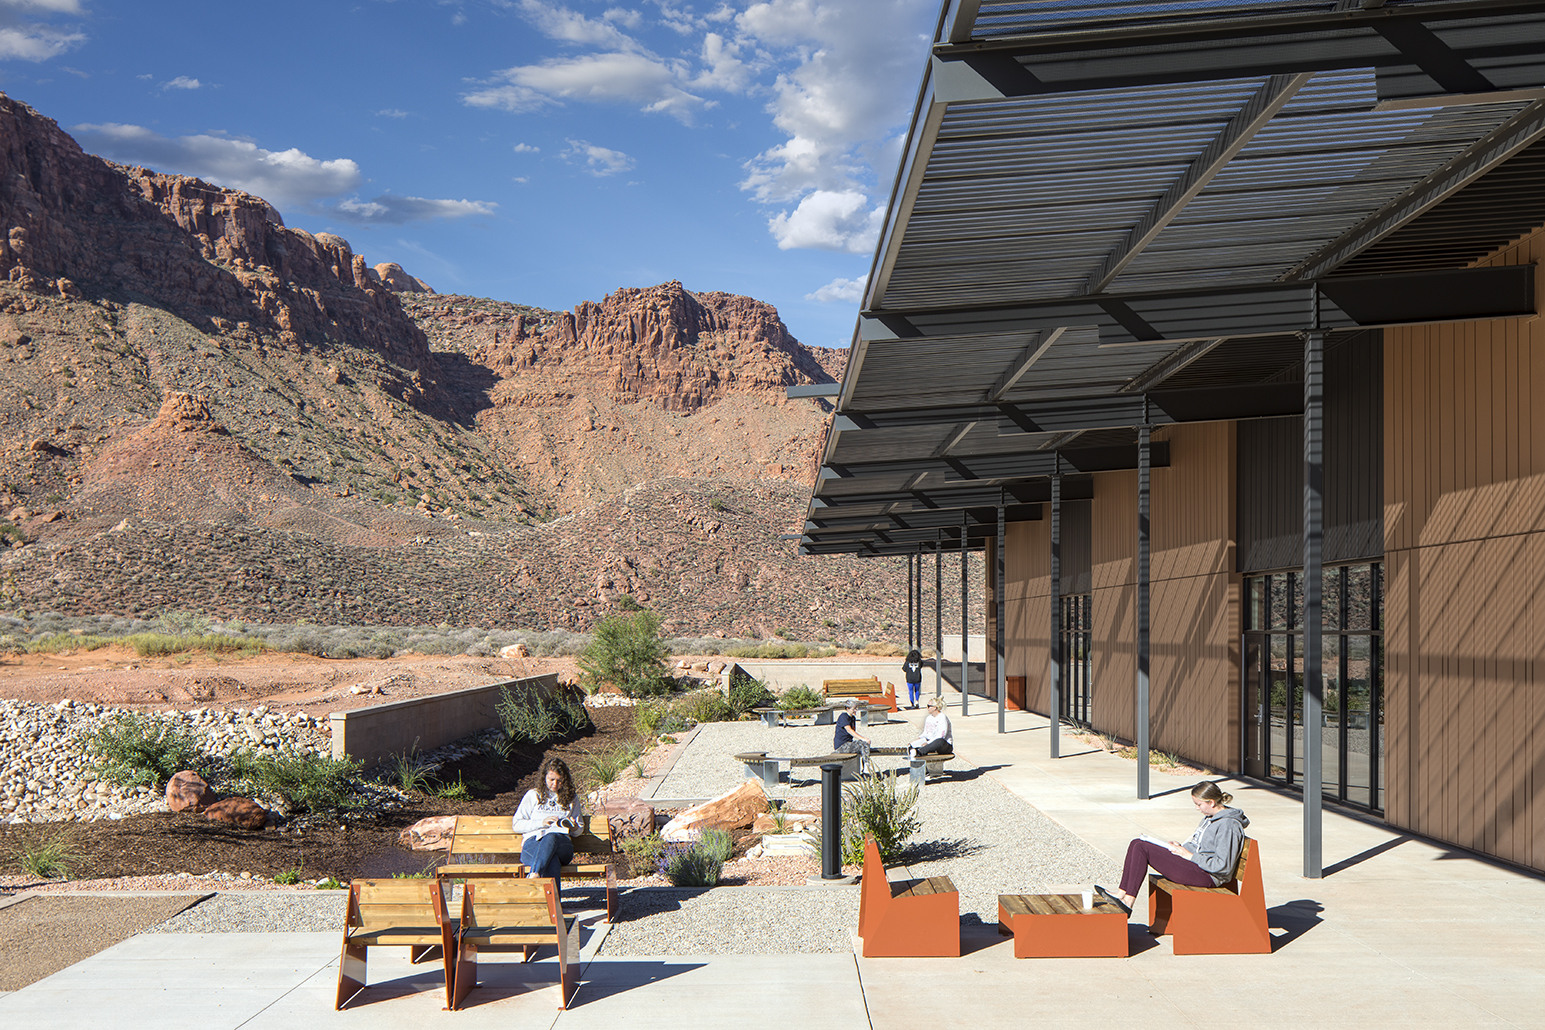 Utah State University, Moab, UT. MHTN Architects.Architectural Photography by: Paul Richer / RICHER IMAGES